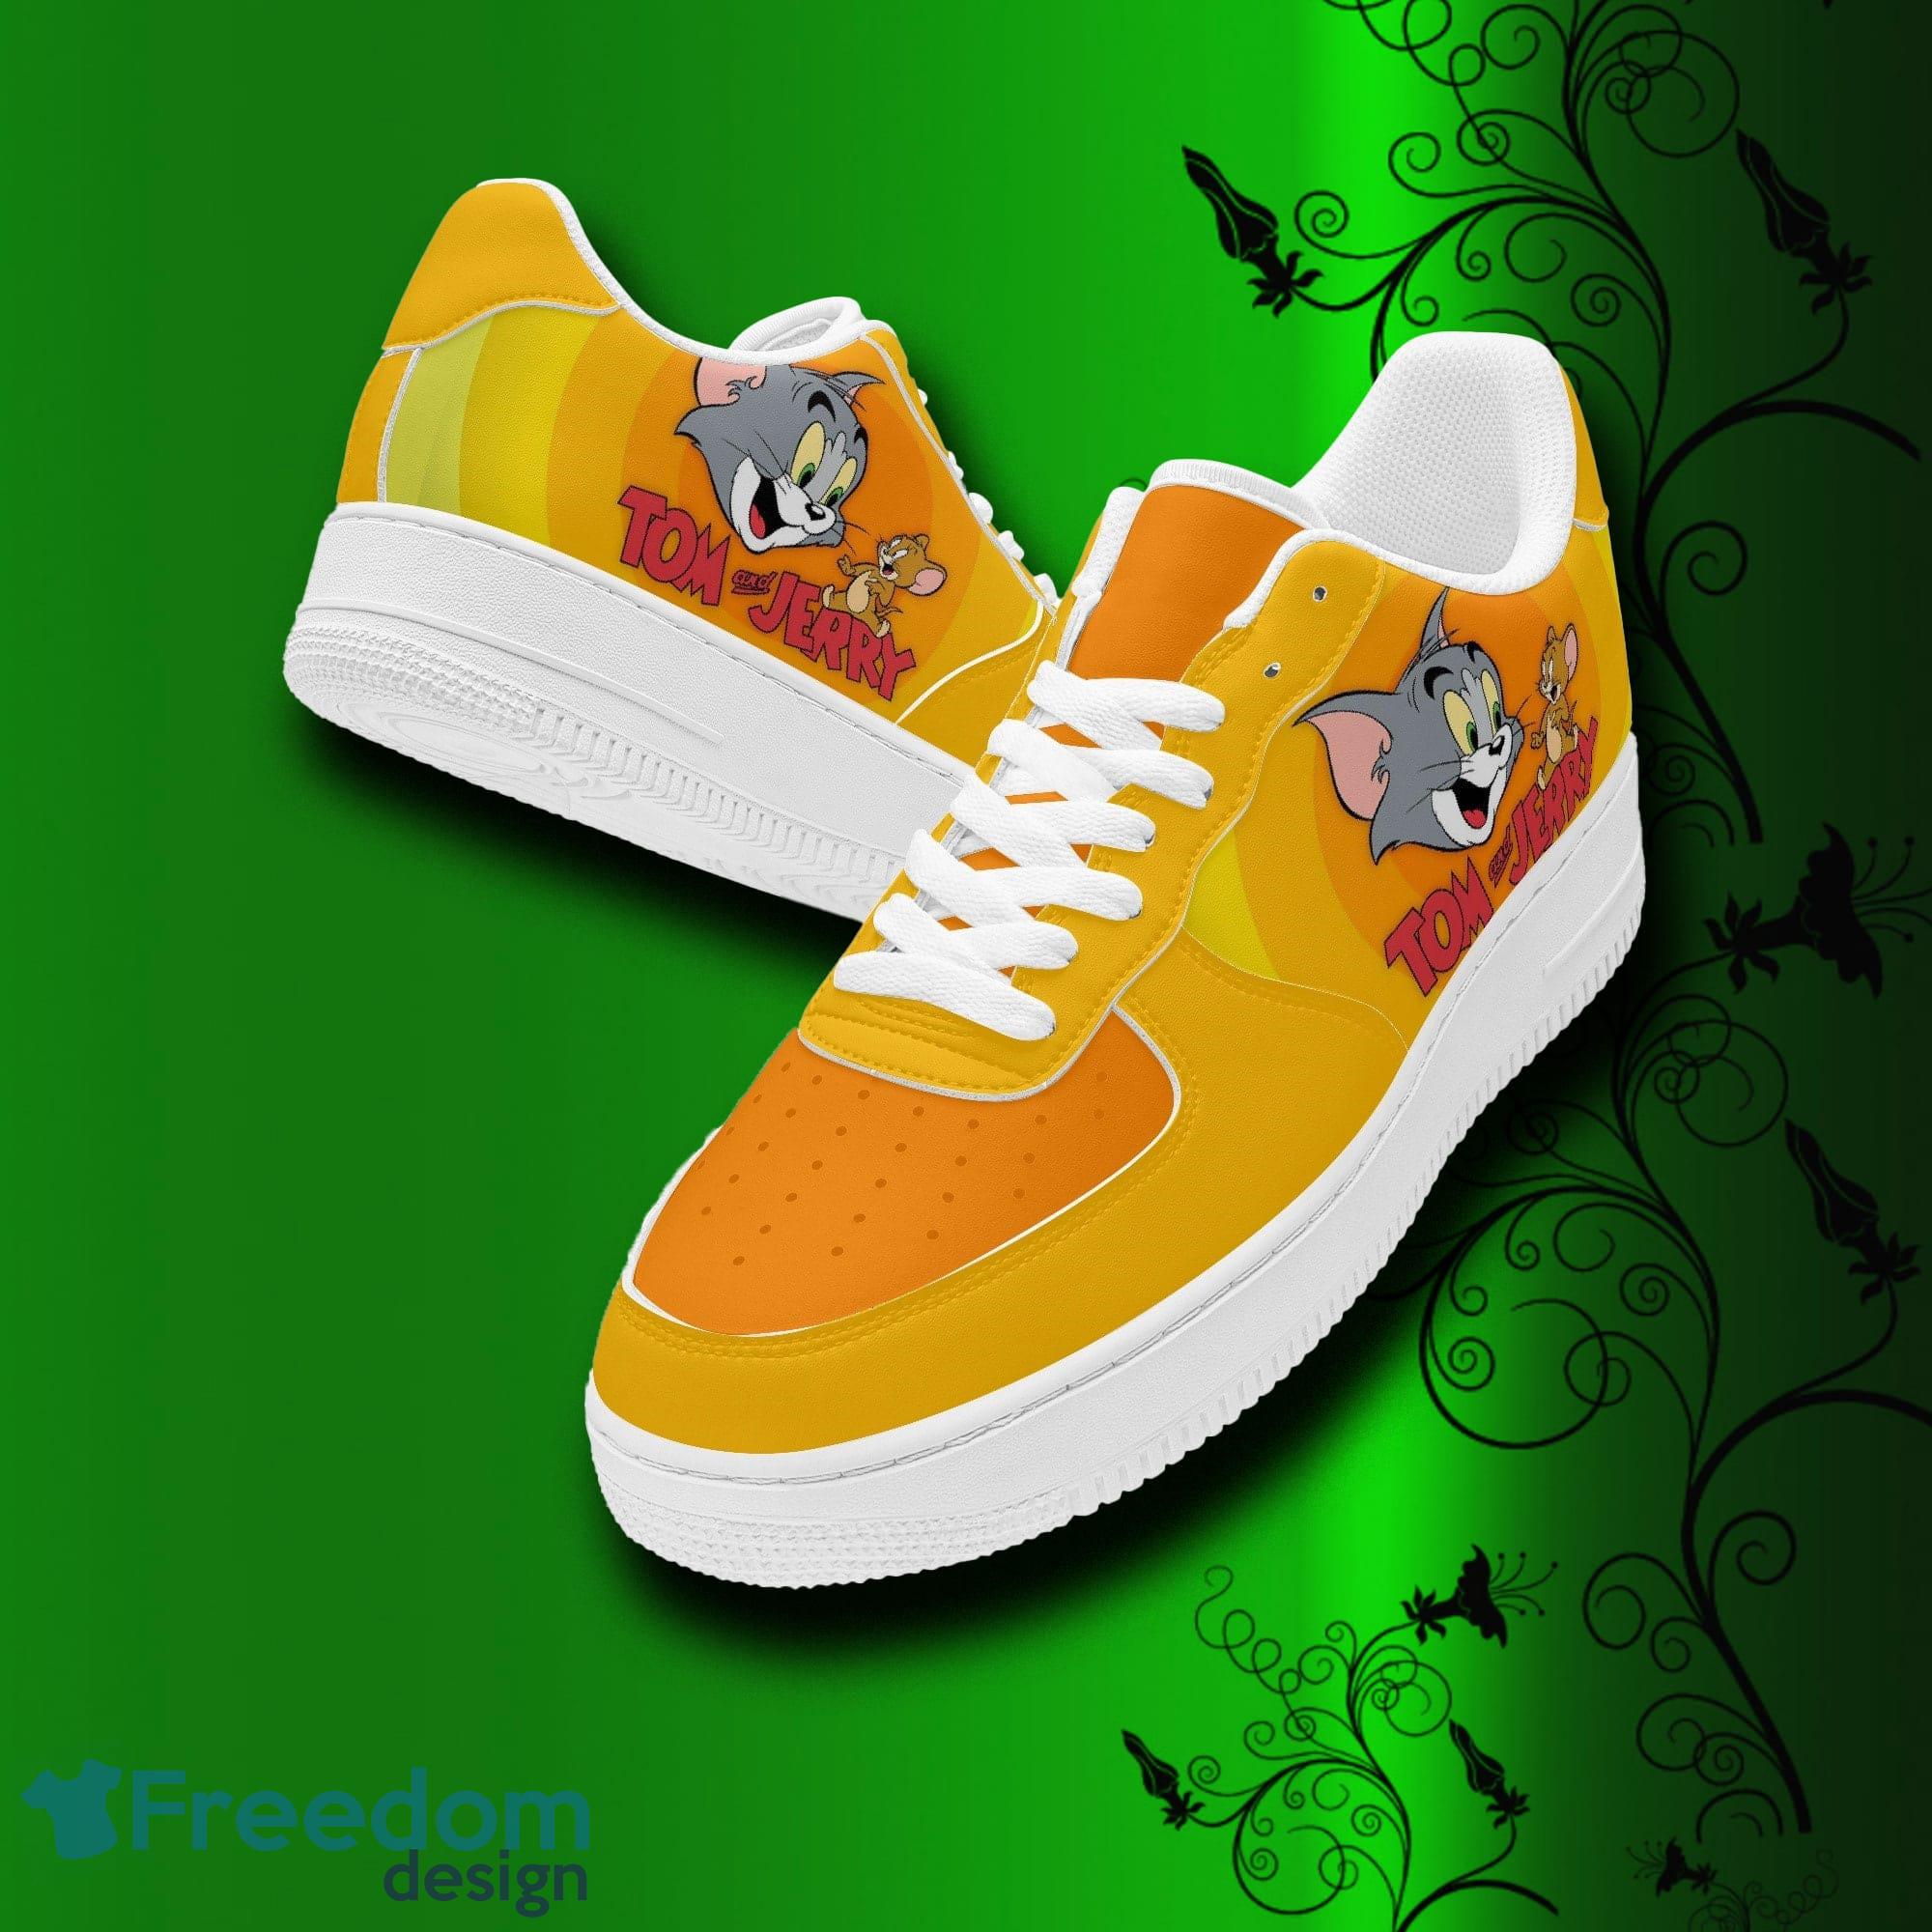 Tom And Jerry Force Shoes Print Gift For Men Women - Freedomdesign